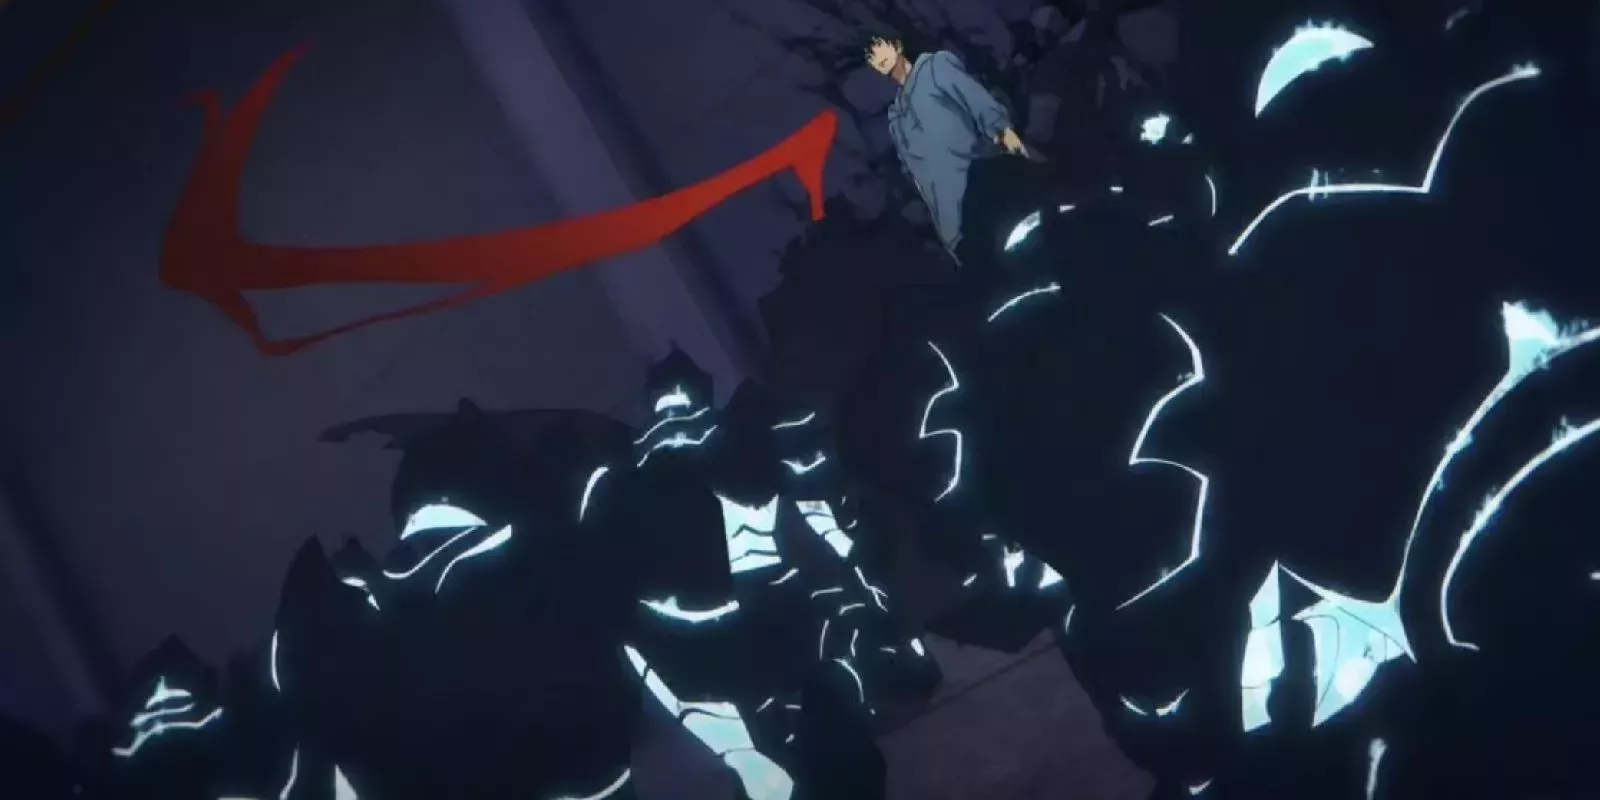 Jinwoo stands among his Shadow Army as the Shadow Monarch in the Solo Leveling anime